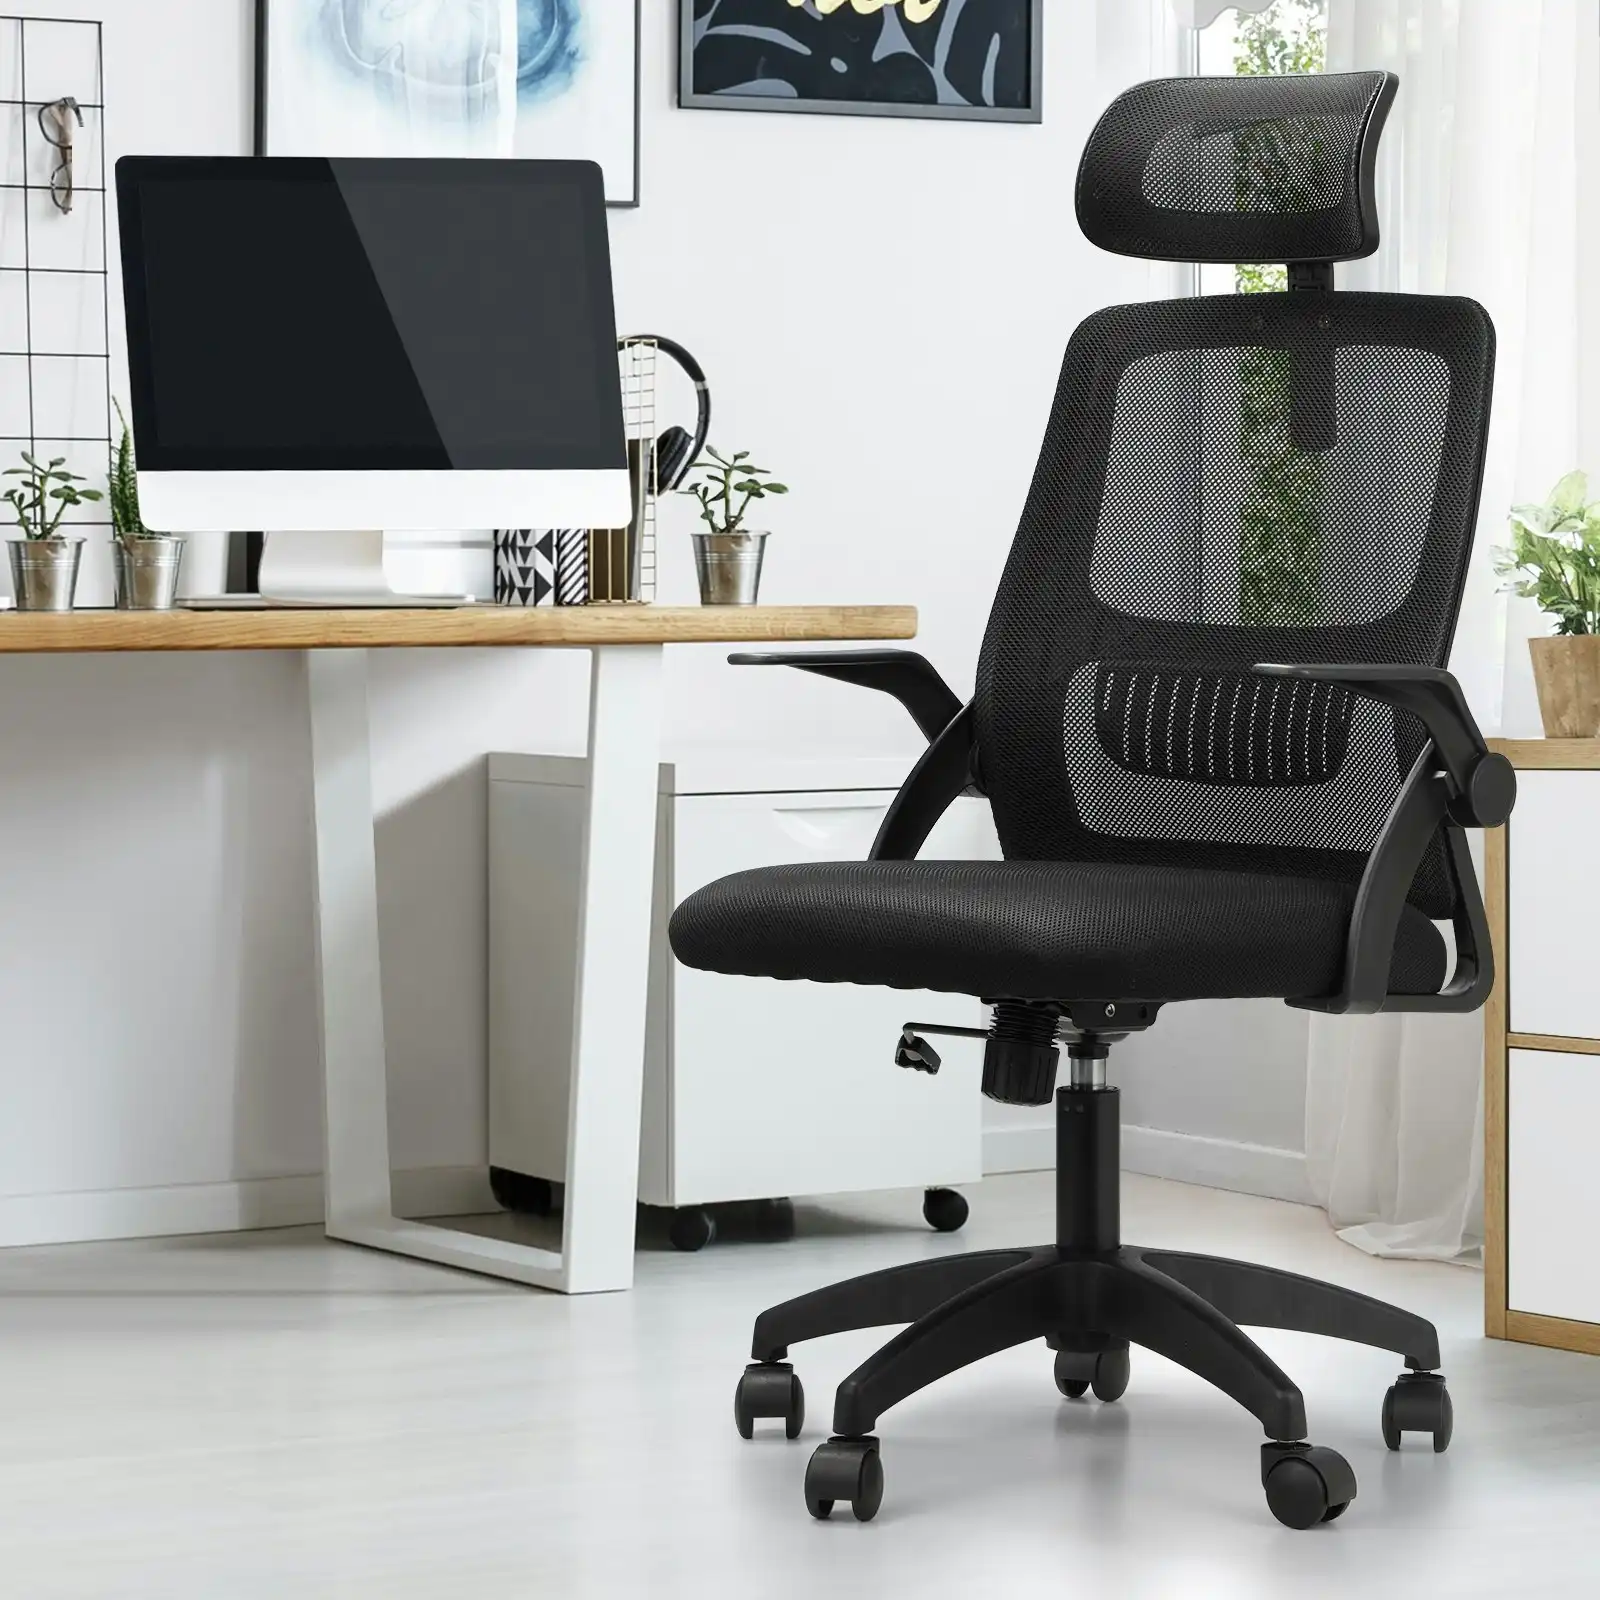 Oikiture Mesh Office Chair Executive Fabric Gaming Seat Racing Computer Black1